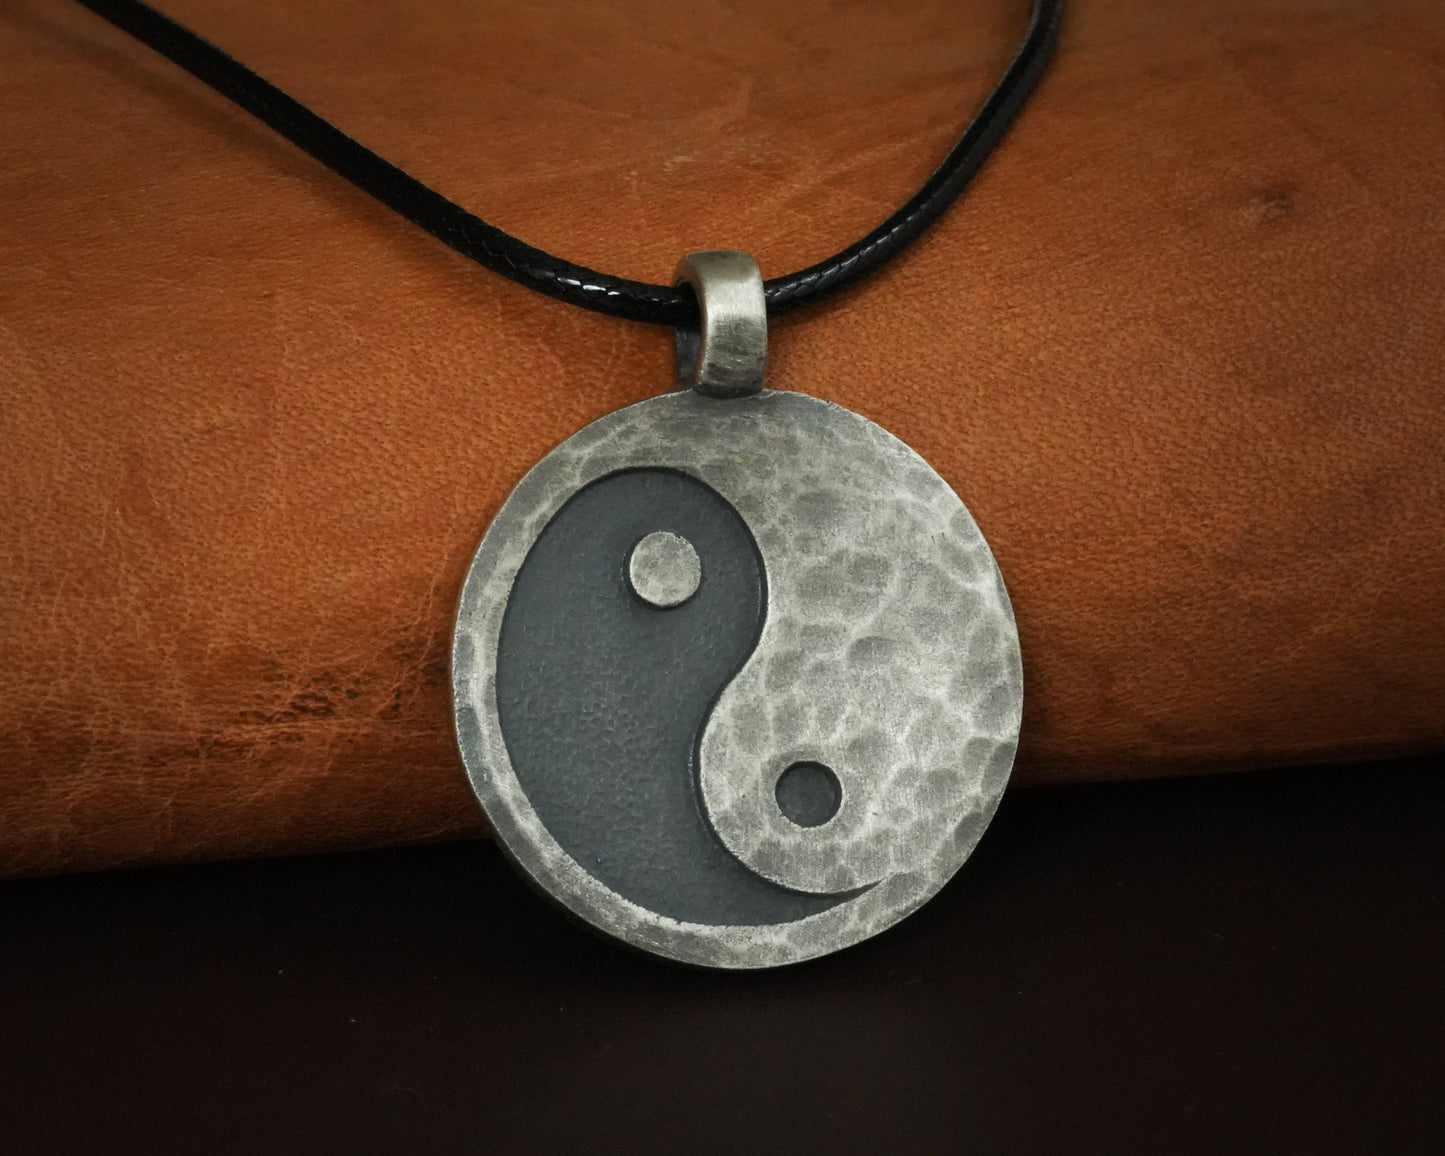 Hand Hammered Ancient Looking Yin Yang Necklace Pendant For Men and Women With Adjustable String - Baldur Jewelry